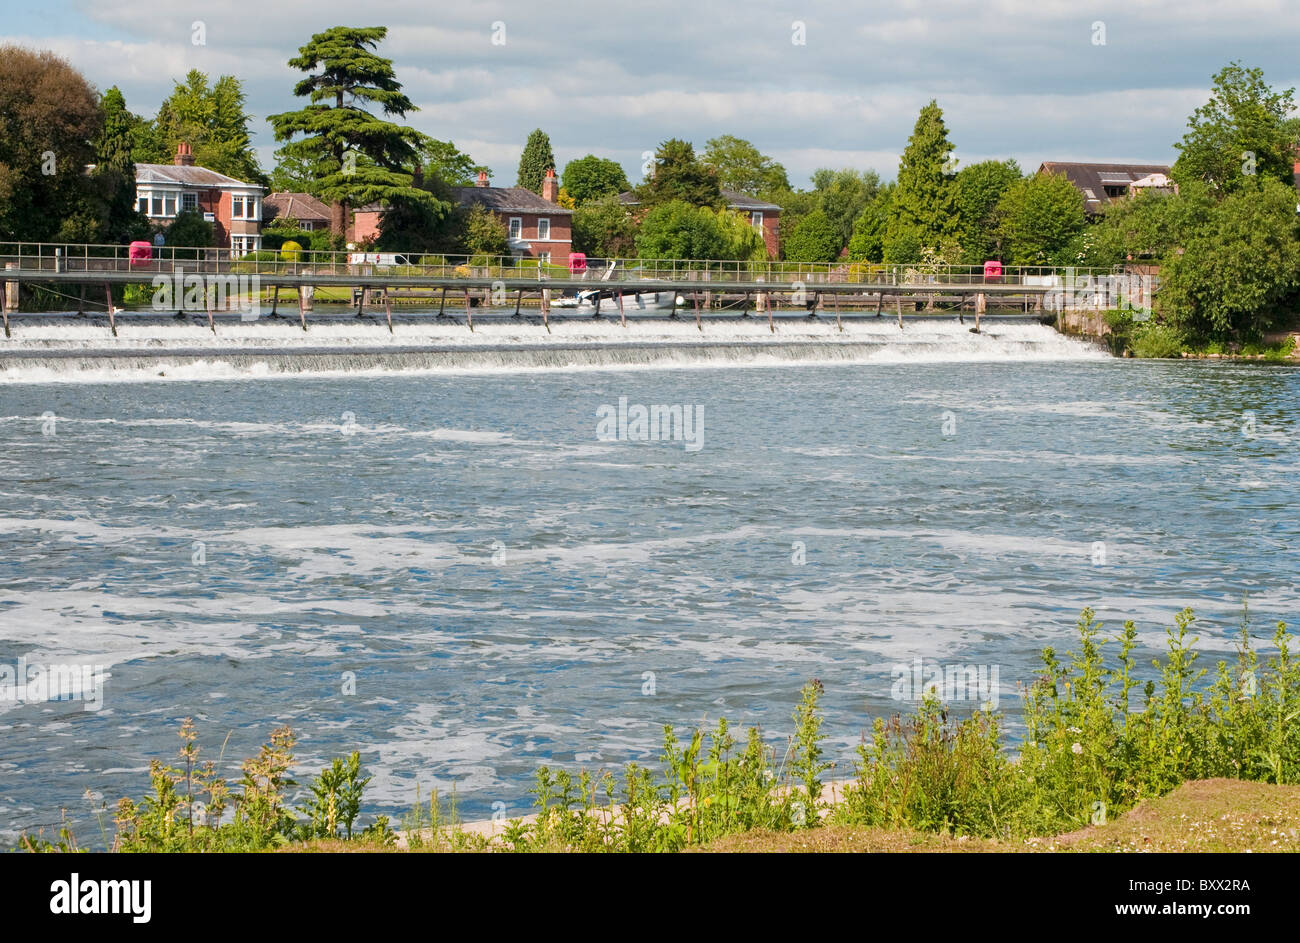 The Weir on the River Thames at Marlow, an English town in Buckinghamshire England UK Stock Photo